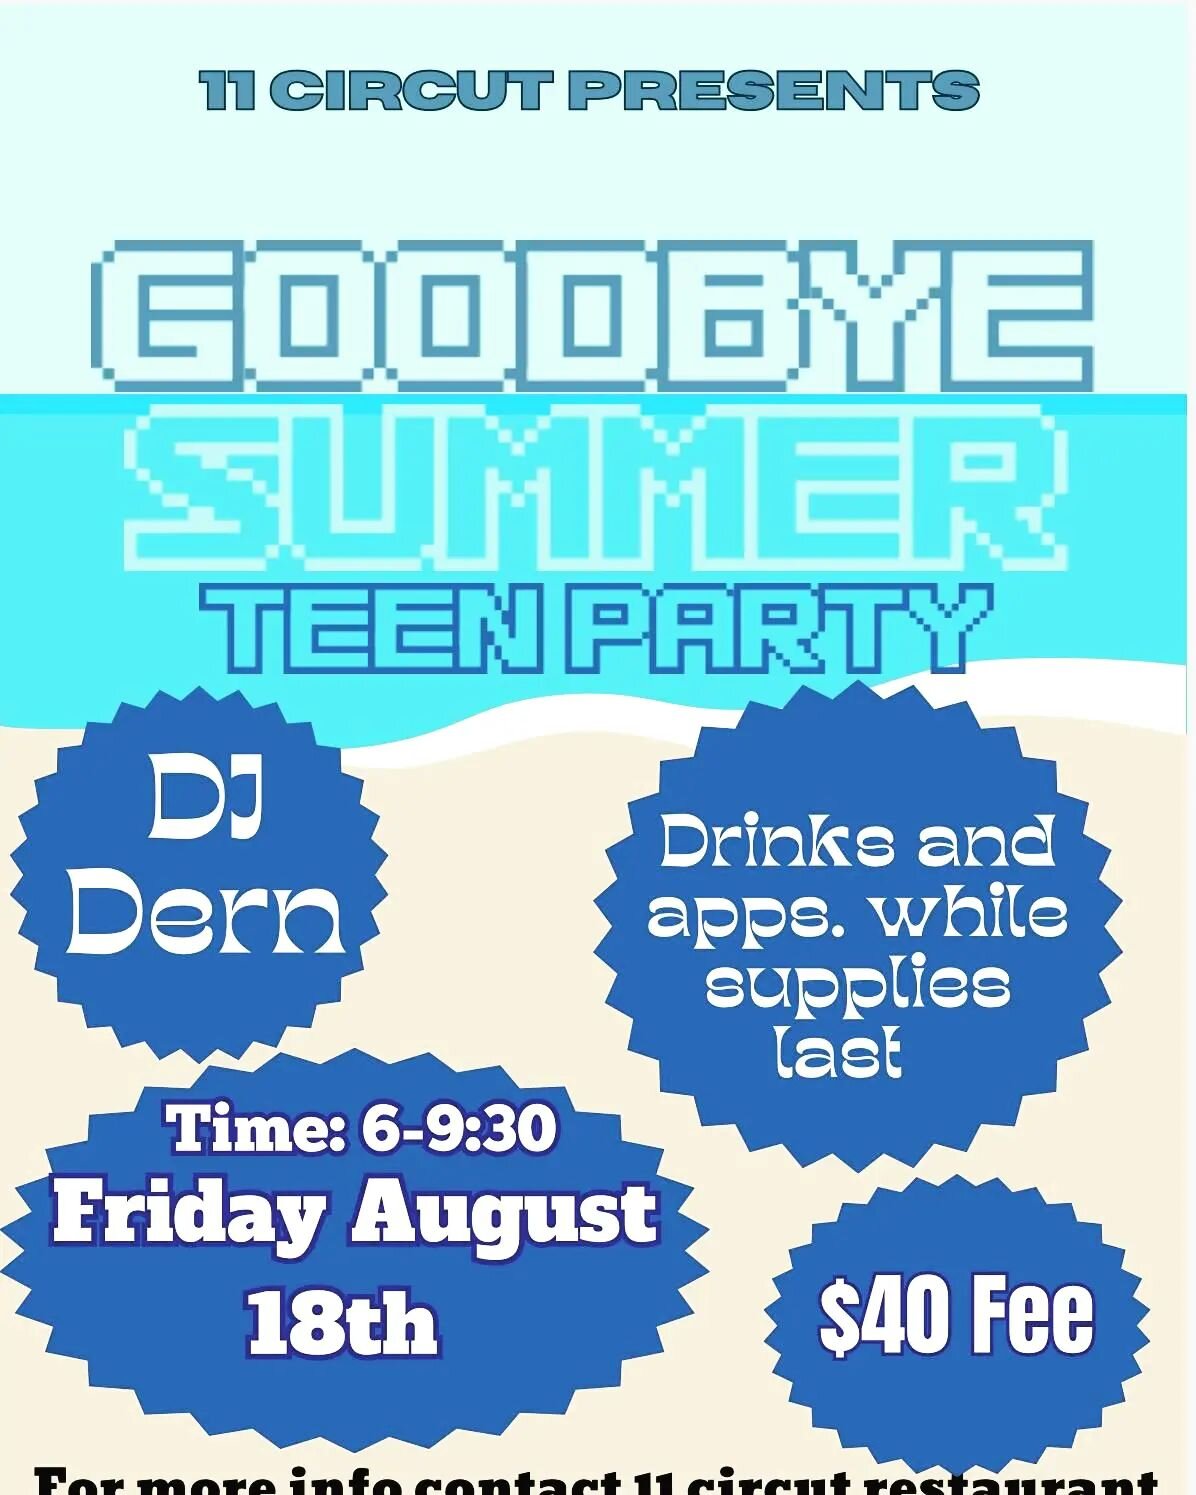 Teen party tomorrow starting @6pm with appetizers and mocktails and music by @dj_dern its gonna be 💥.
#oakbluffsmarthasvineyard #oakbluffsmv #inkwell #teenparty #funtimes #summervibes #summer #mv #partykids #party #dj #music #teen #mocktails #placet